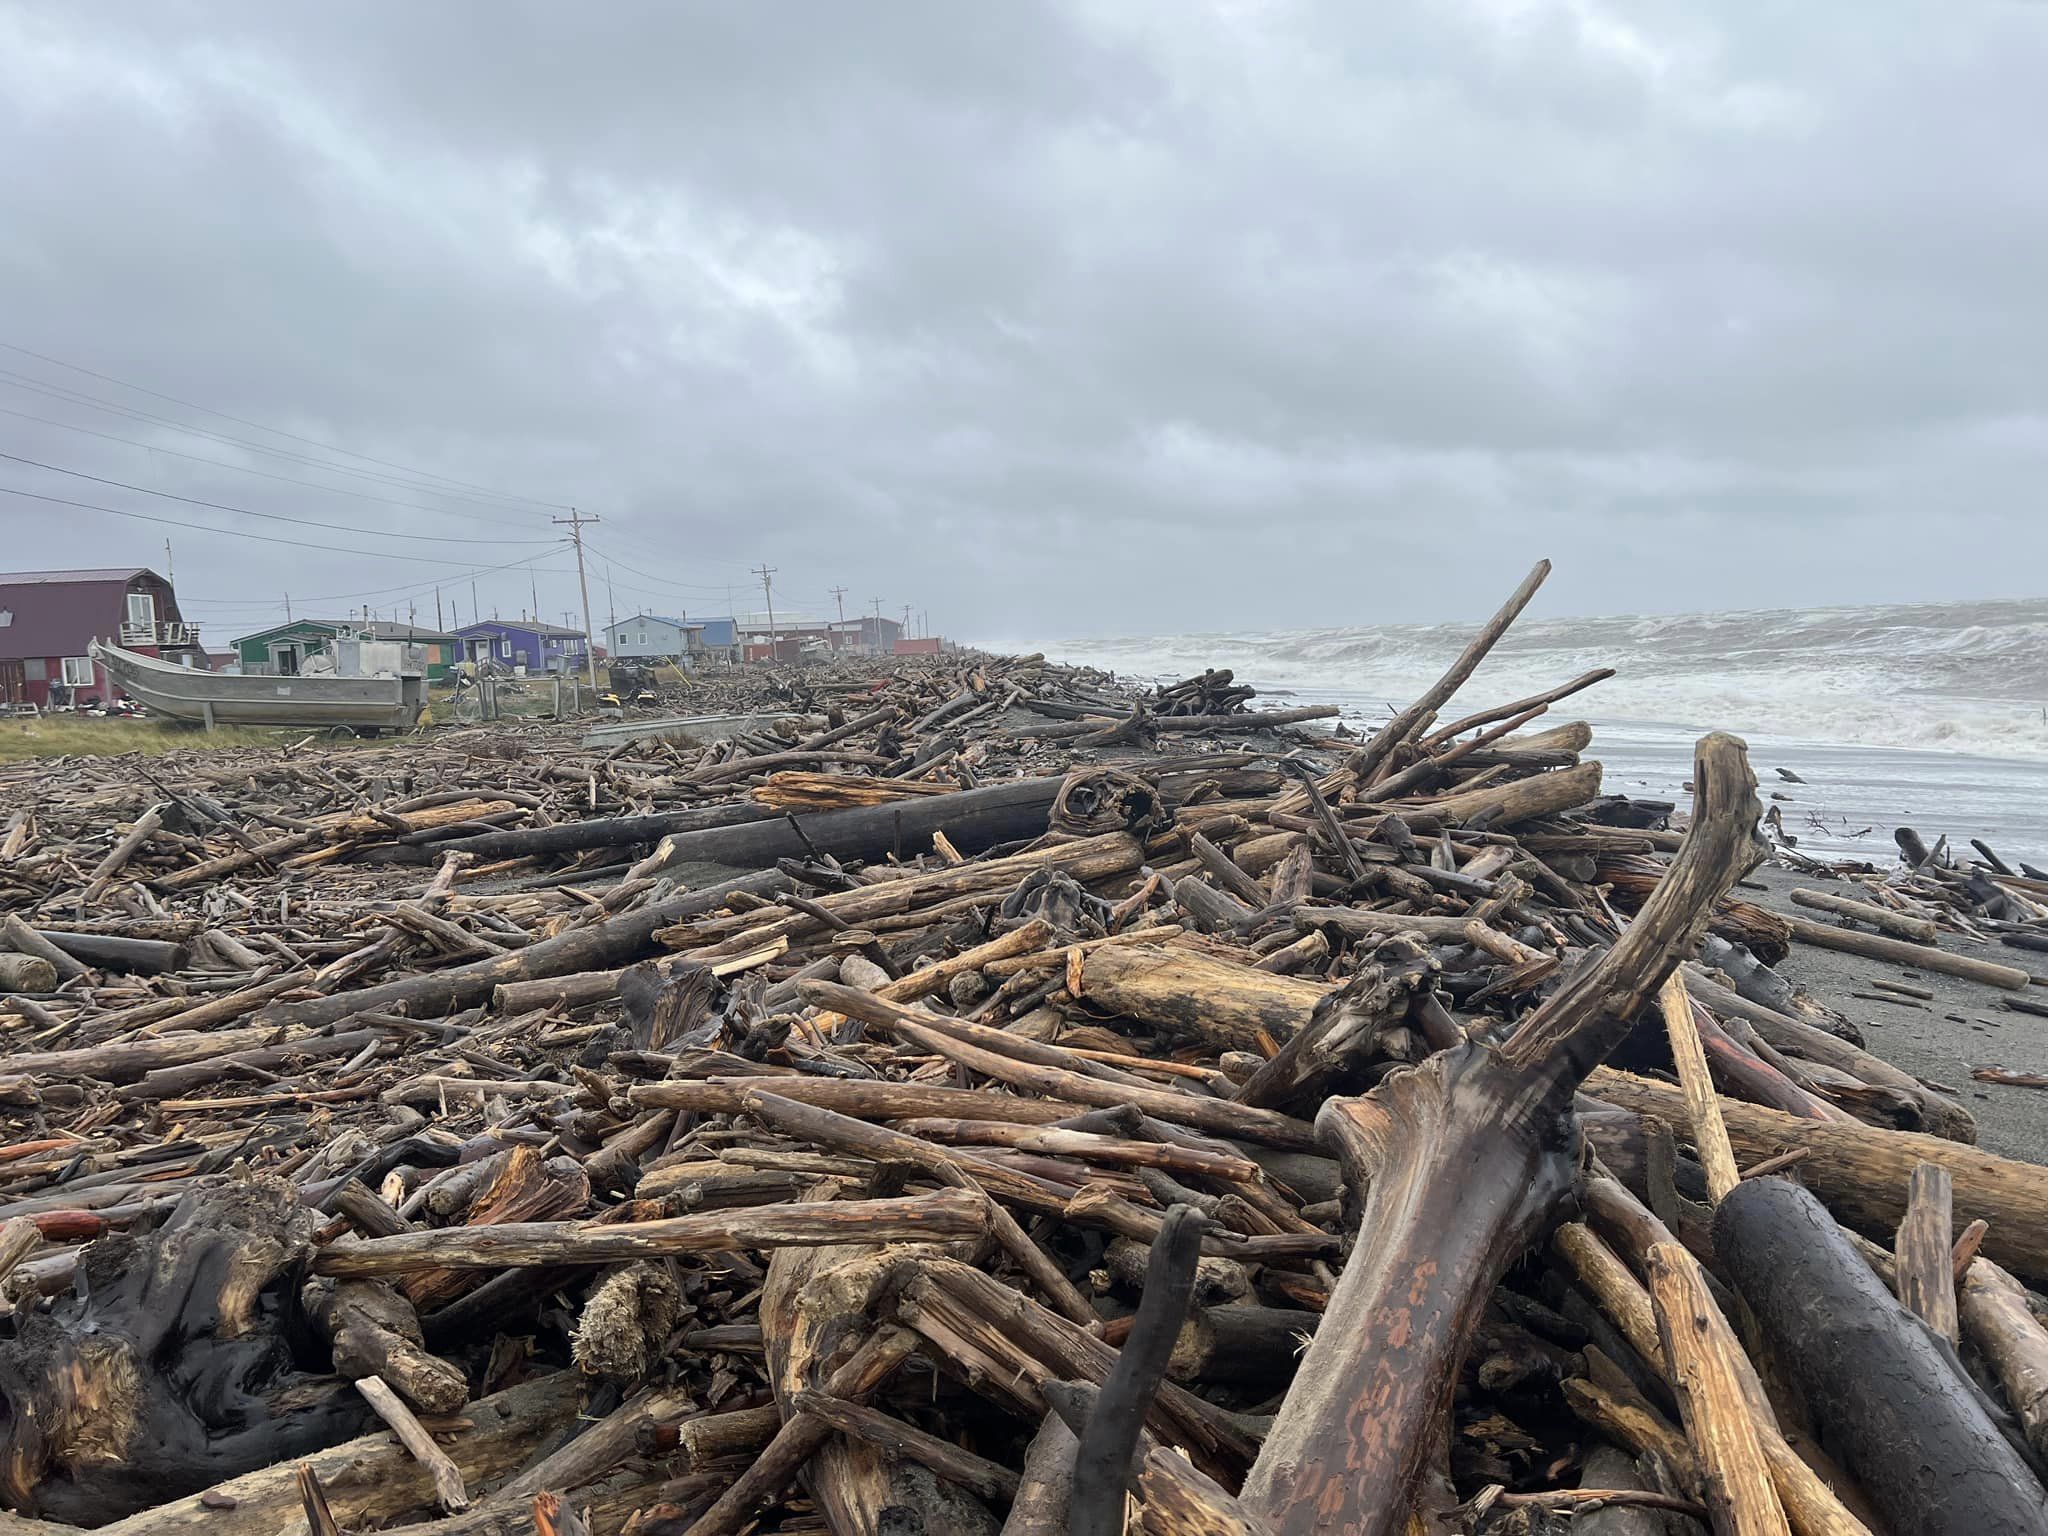 branches piled up on the beach to prevent further damage from flooding.